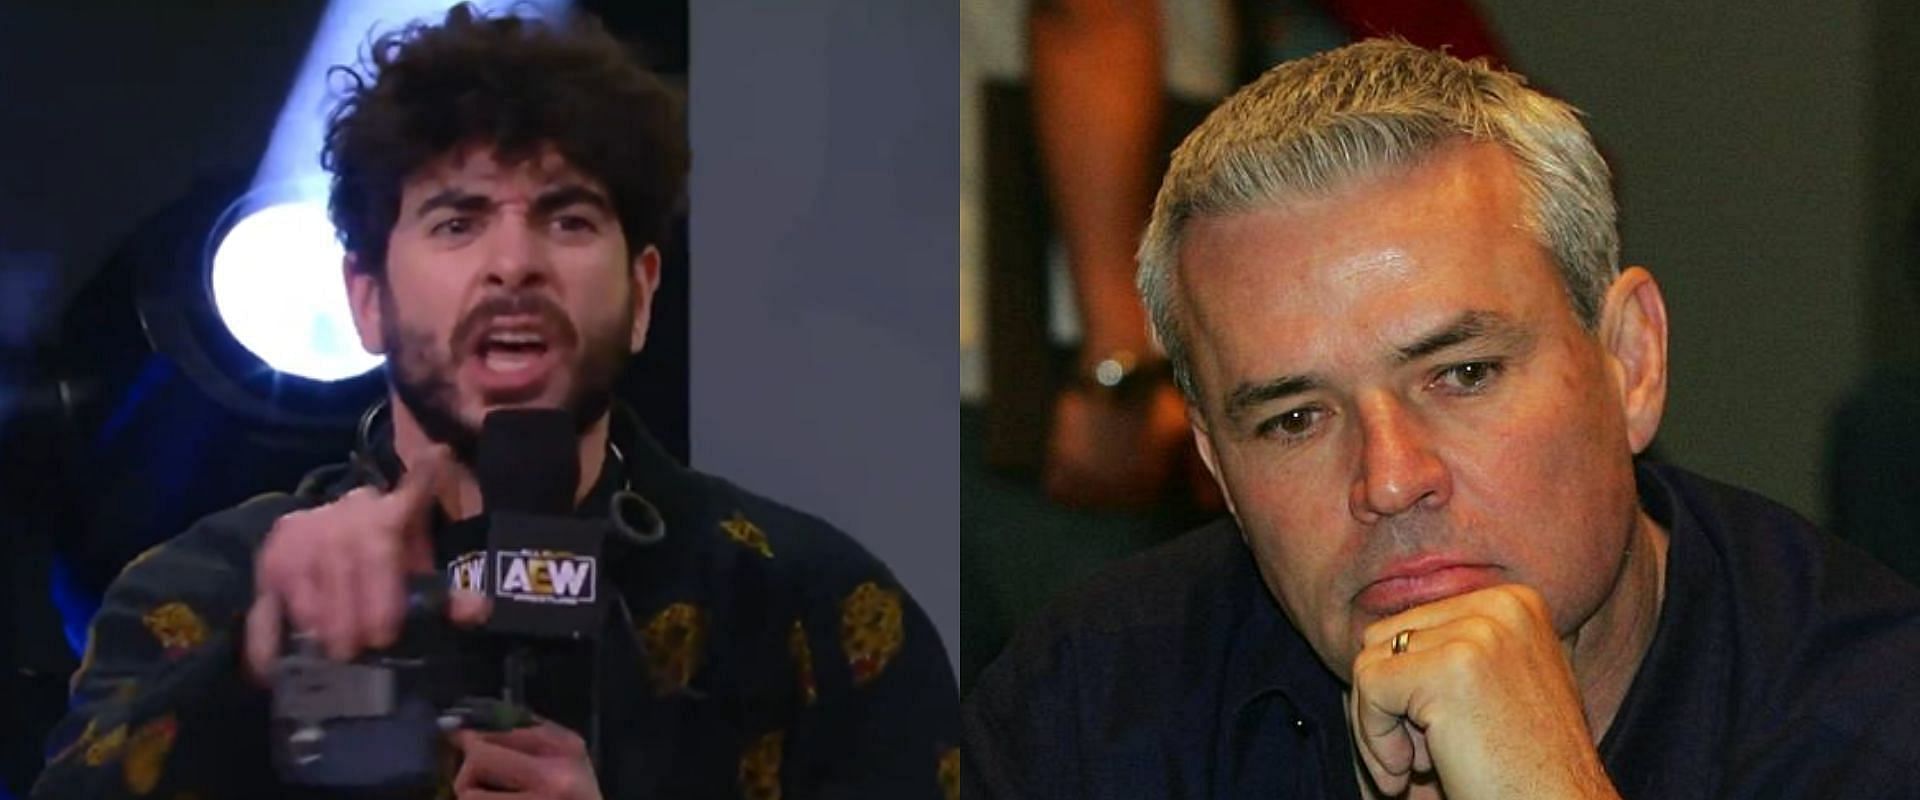 WCW Legend Eric Bischoff expresses his honest opinion to Tony Khan's comments about the recent WWE releases